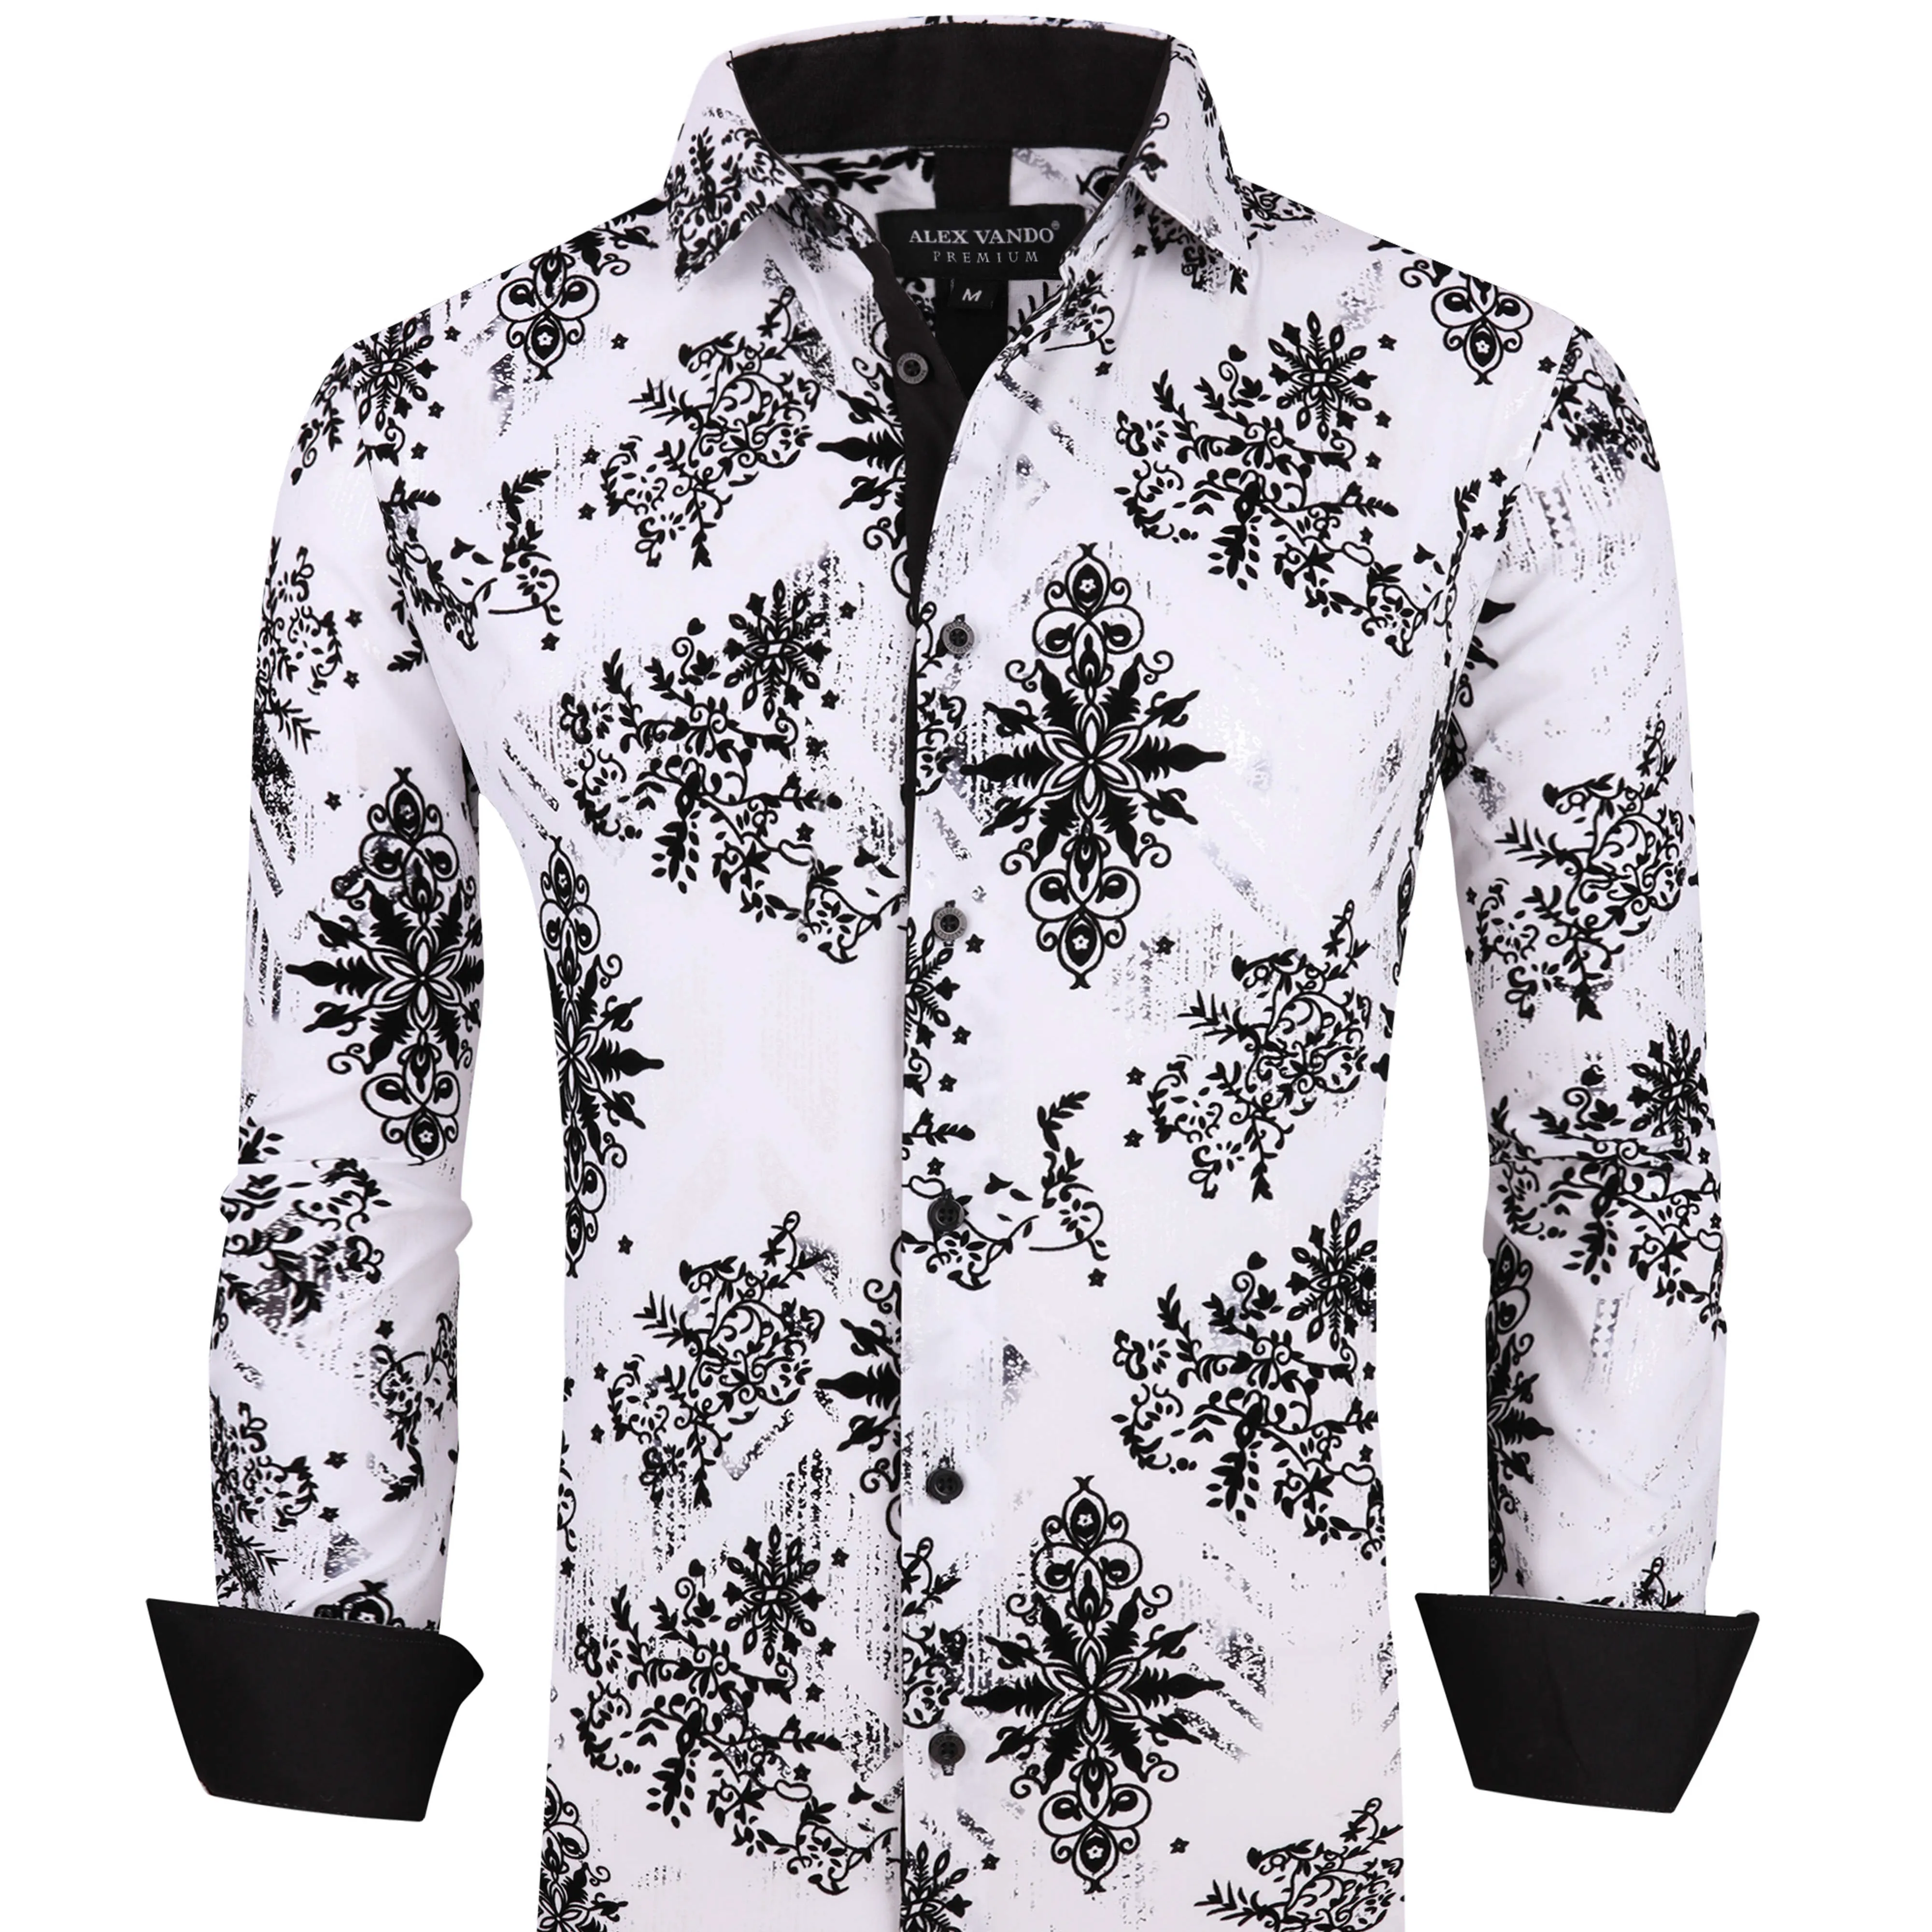 Whole Sale Men's Luxury Printed Dress Shirts Casual Button Down Long Sleeve Shirt for Party Prom